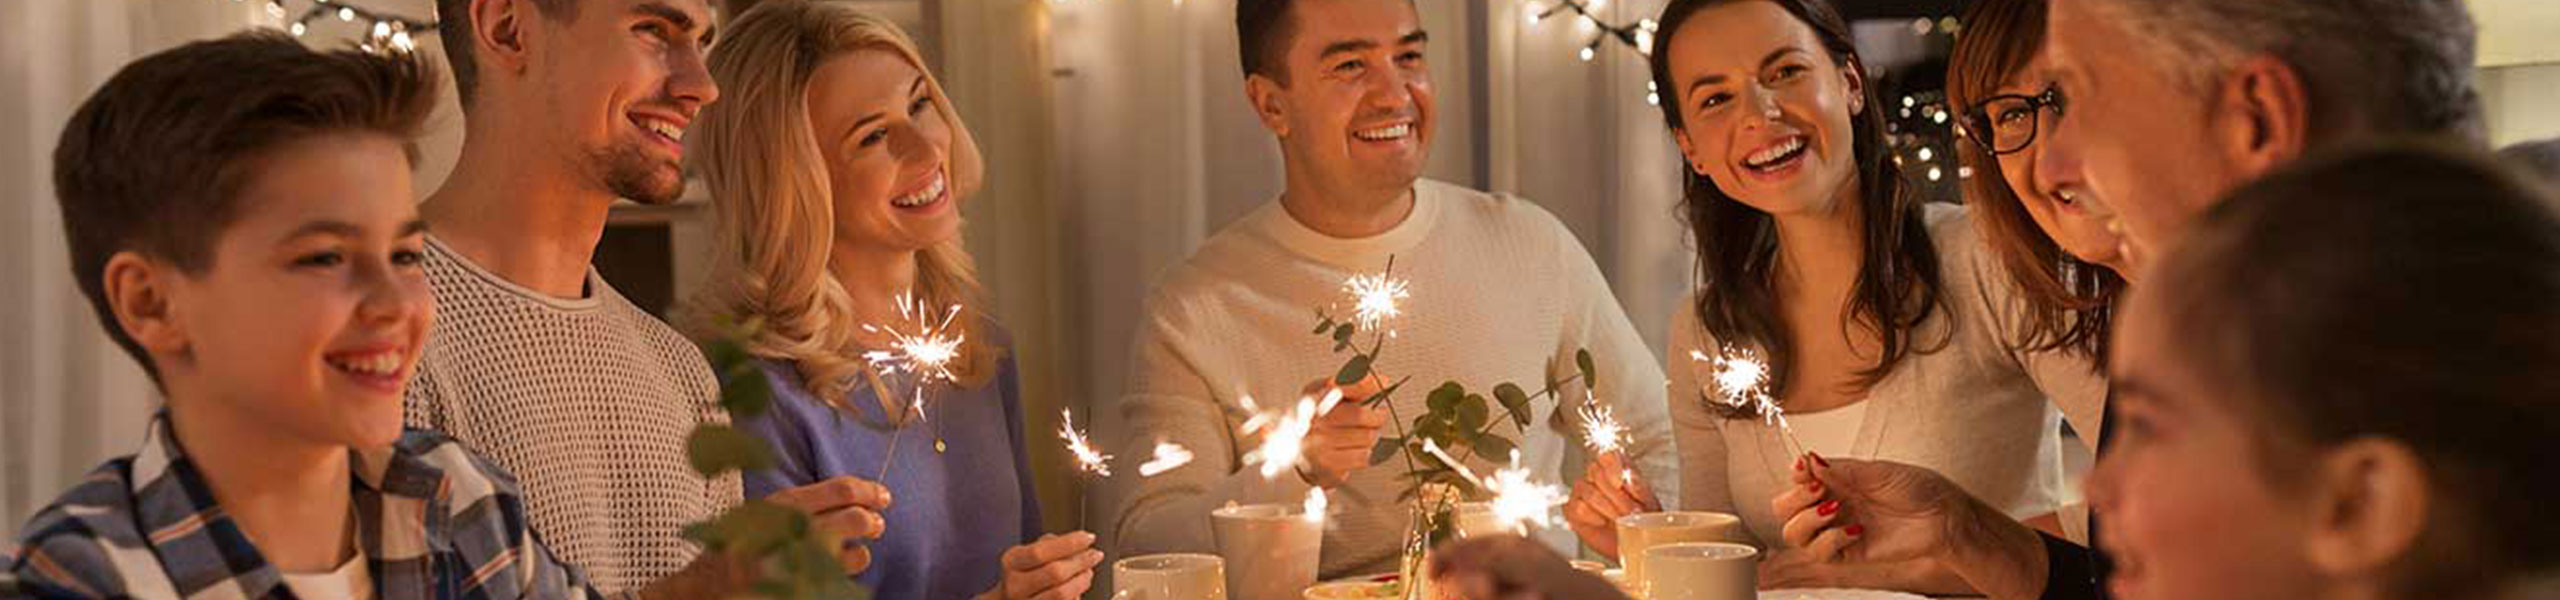 A smiling family sits together at the dinner table holding sparklers